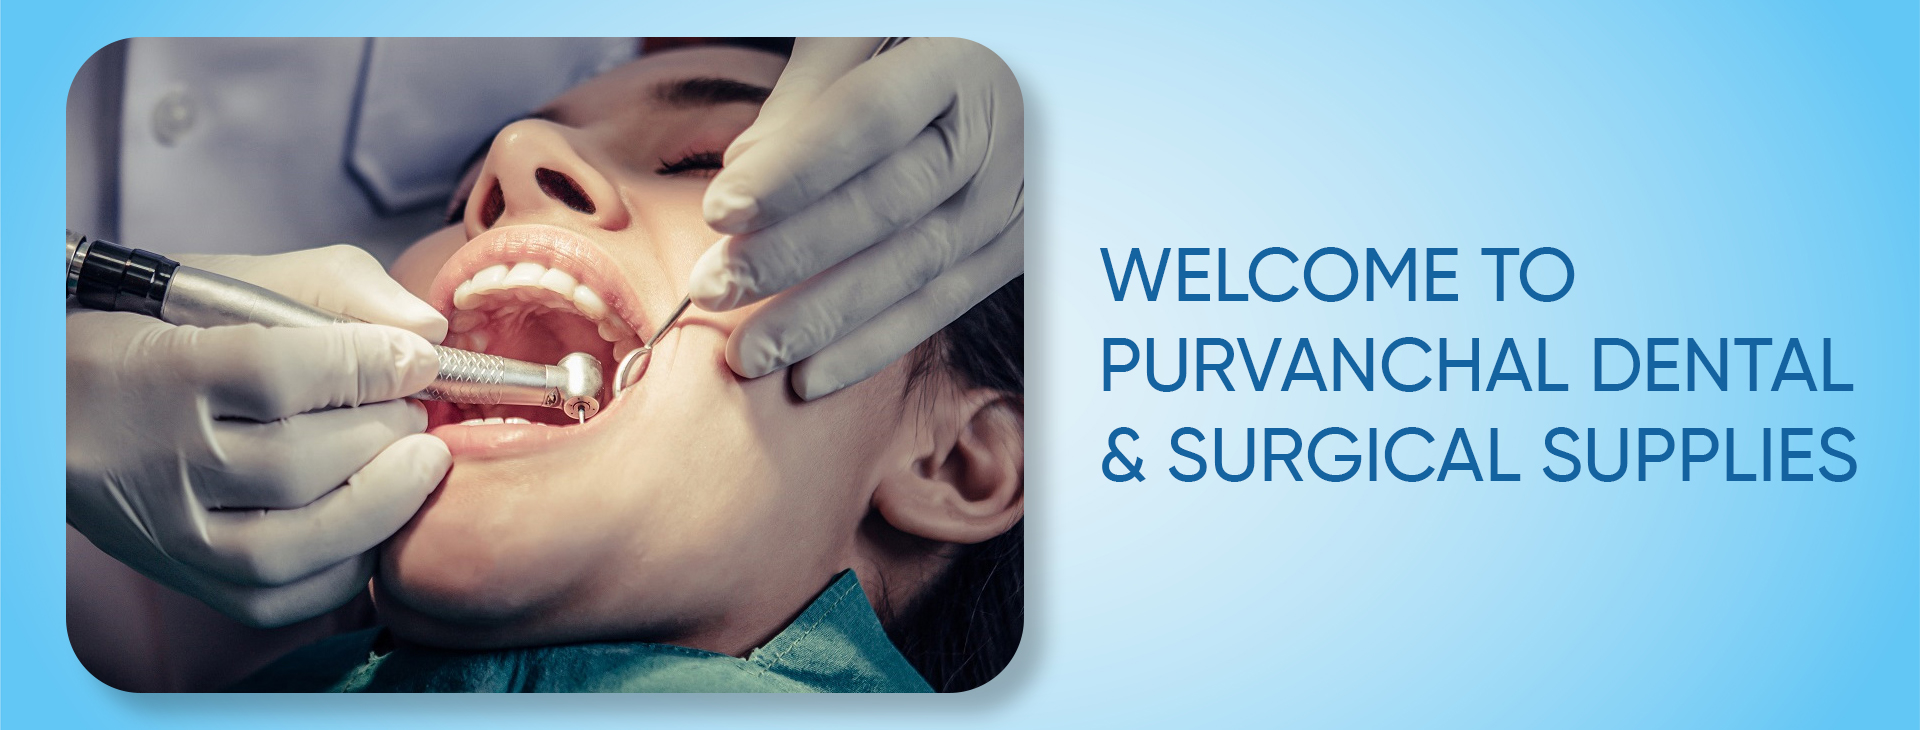 Purvanchal Dental and Surgical Supplies